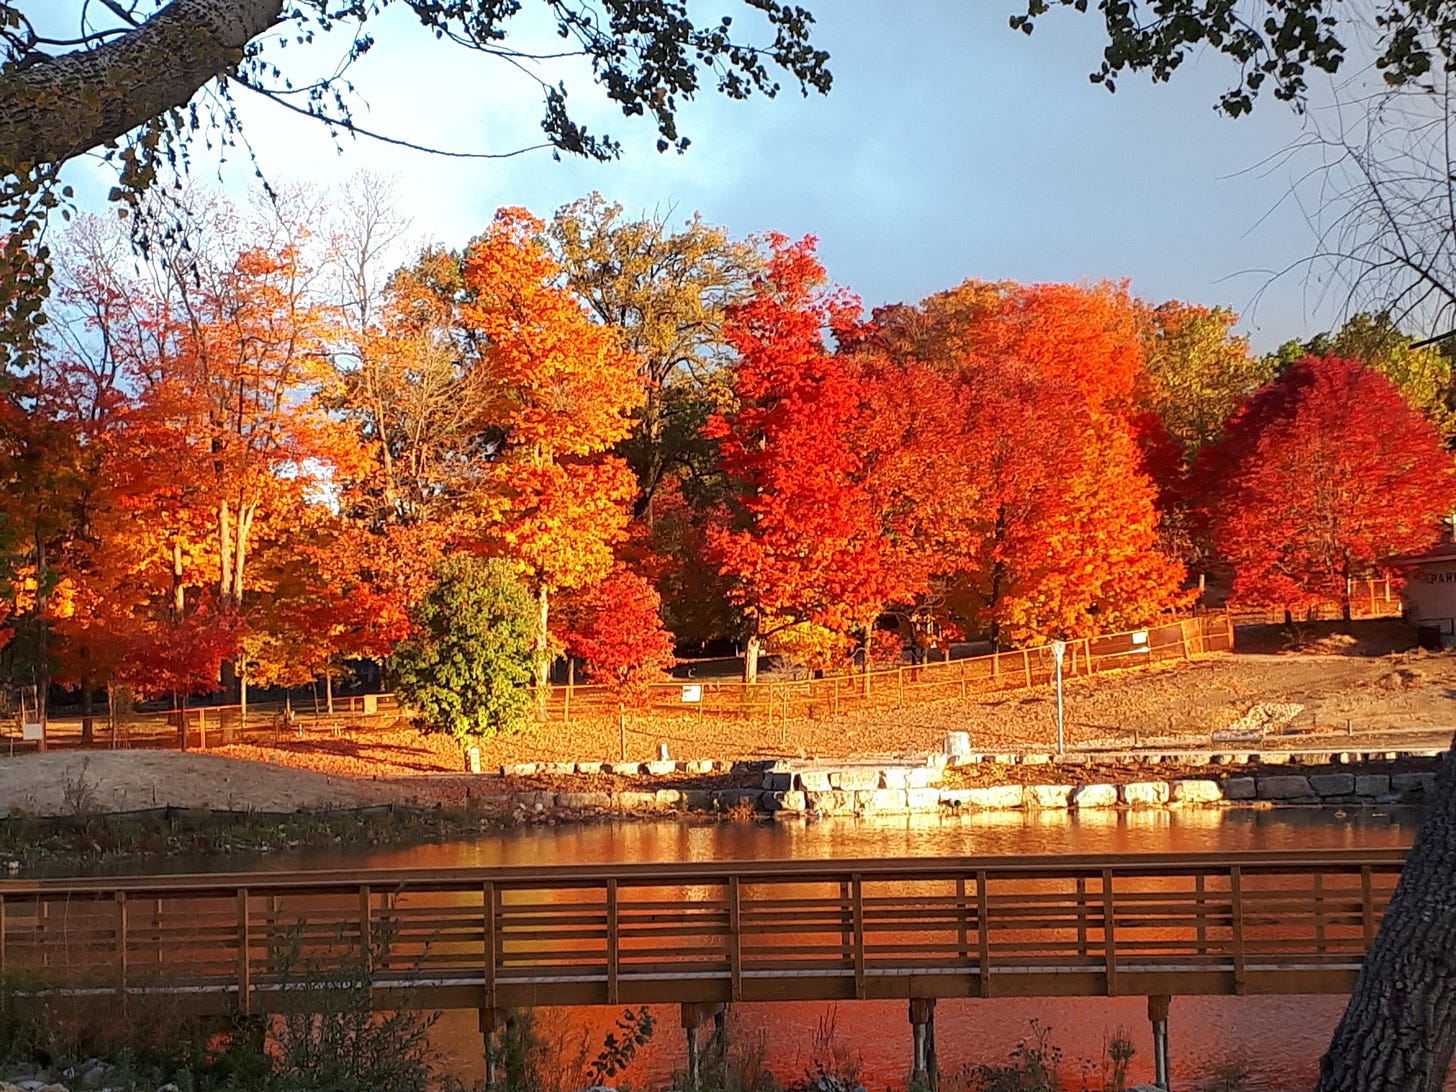 Waterloo Park in the fall with red, orange, and yellow leaves on the trees. Water is in the foreground with a bridge passing over it.